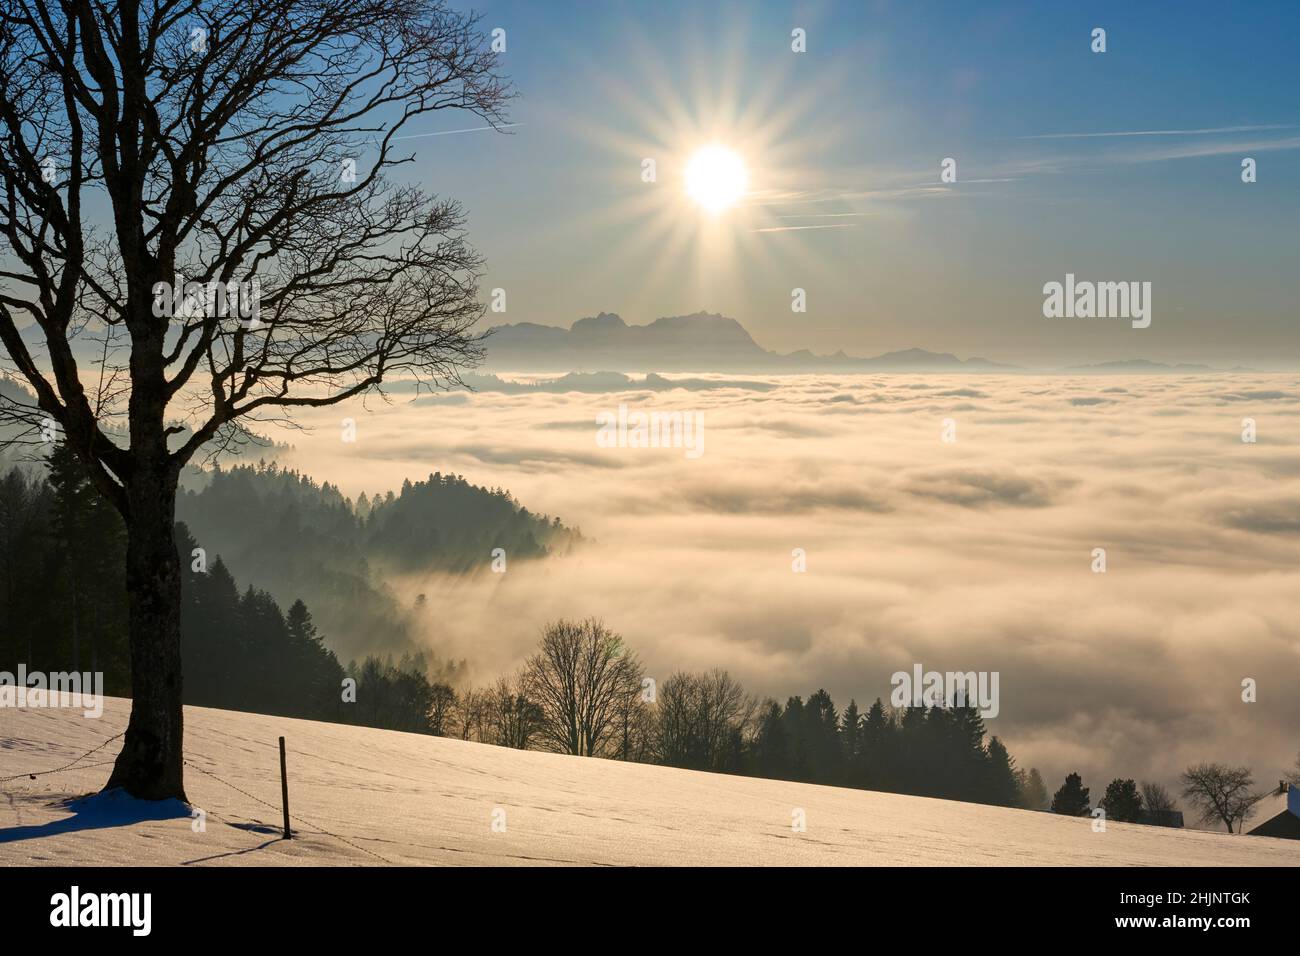 sunset in the snowy Bregenzer Wald area of Vorarlberg, Austria with spectacular view on Mount Saentis above a sea of fog, Switzerland, Sulzberg, Austr Stock Photo